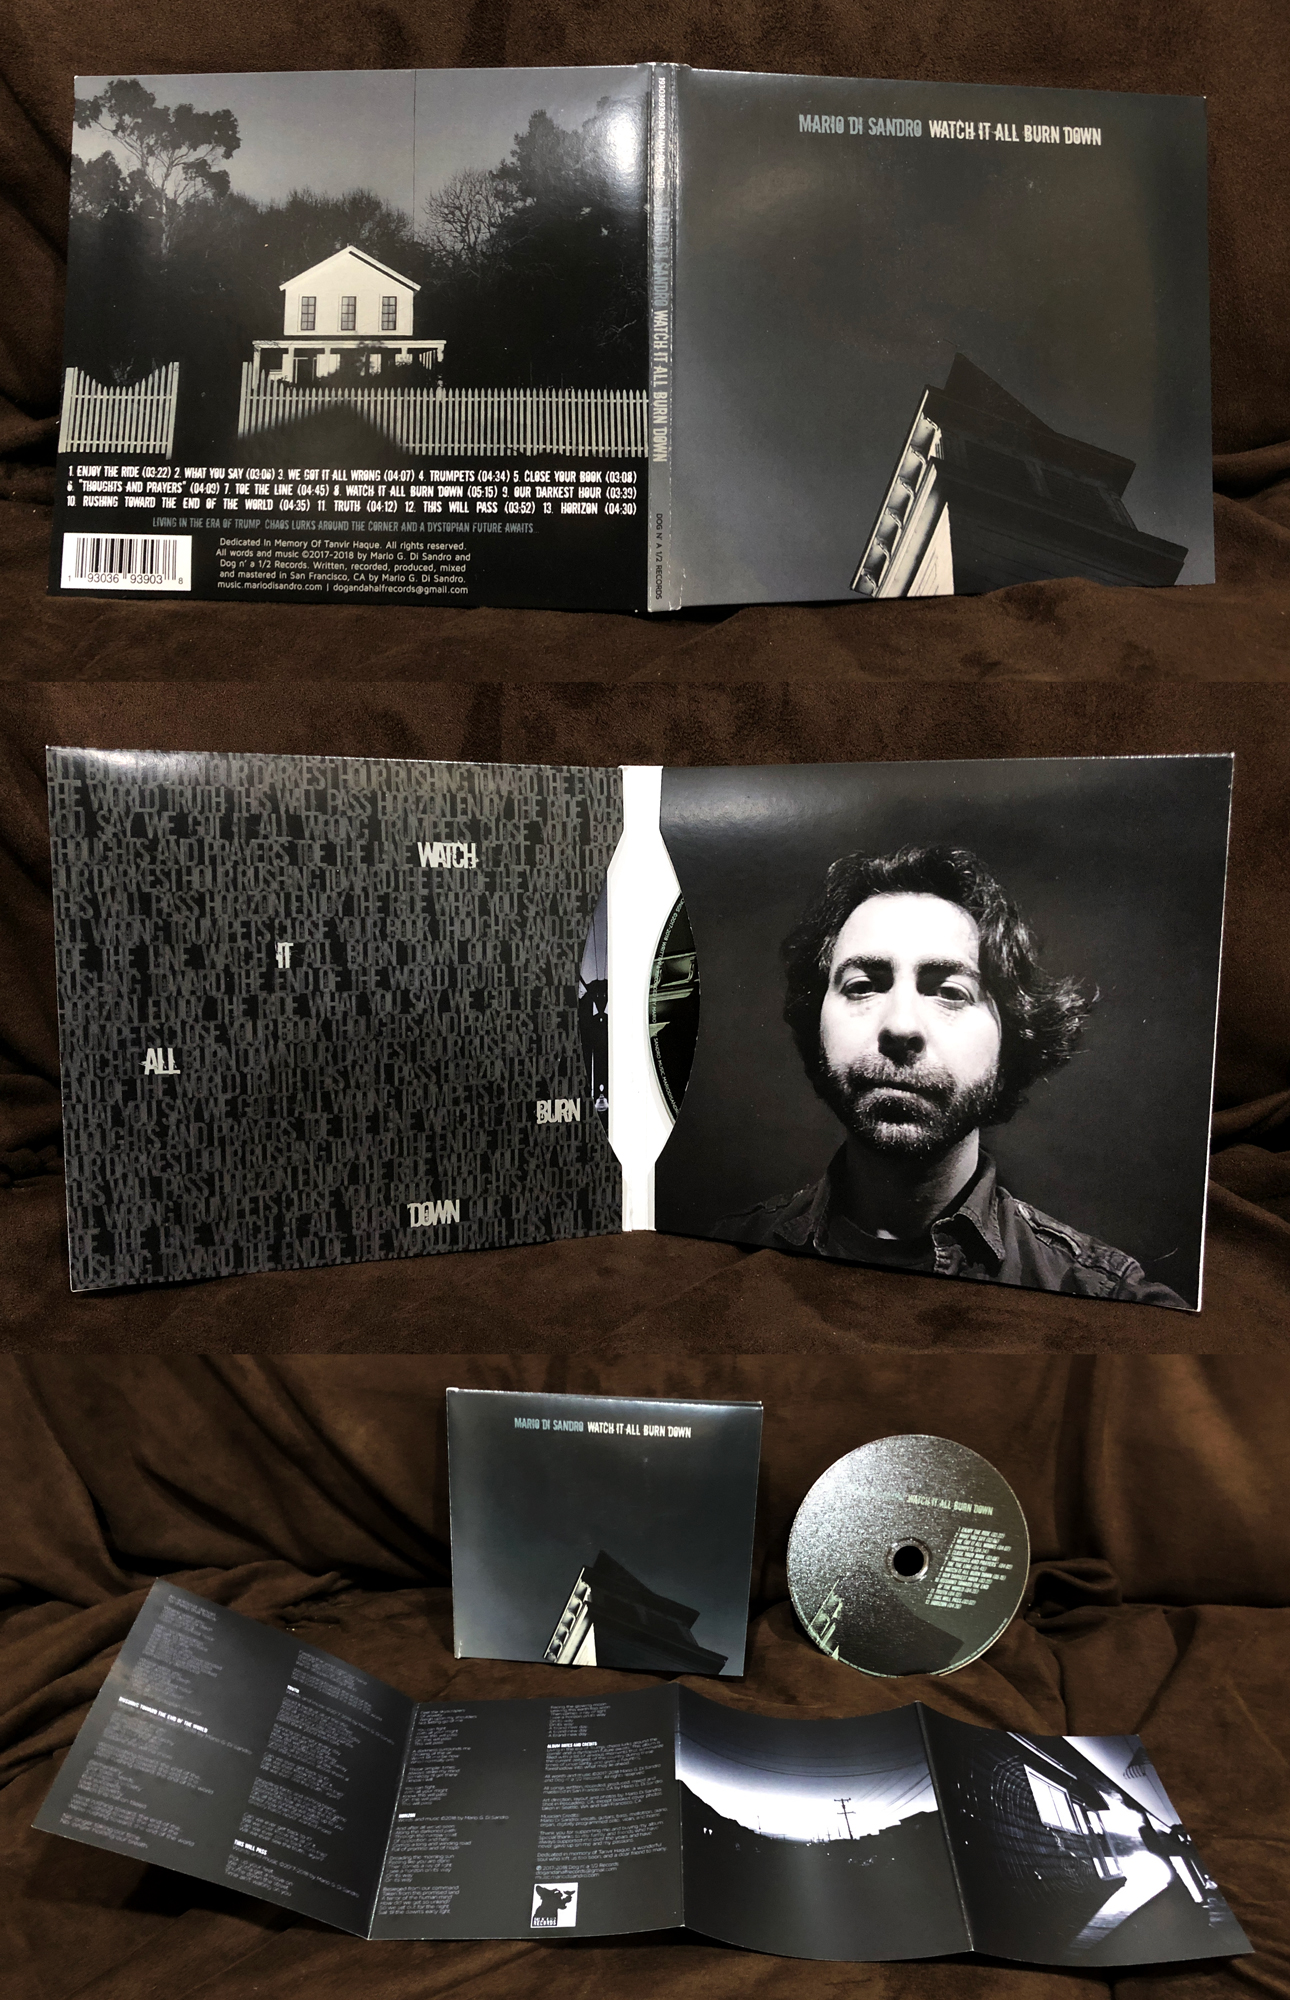 Client: Mario Di Sandro, singer-songwriter and touring musician. Description: Designed the packaging for my album Watch It All Burn Down, including the 8 page accordion booklet, printed on CD, double-wallet insert. Had it professionally printed, and pressed 100 copies.